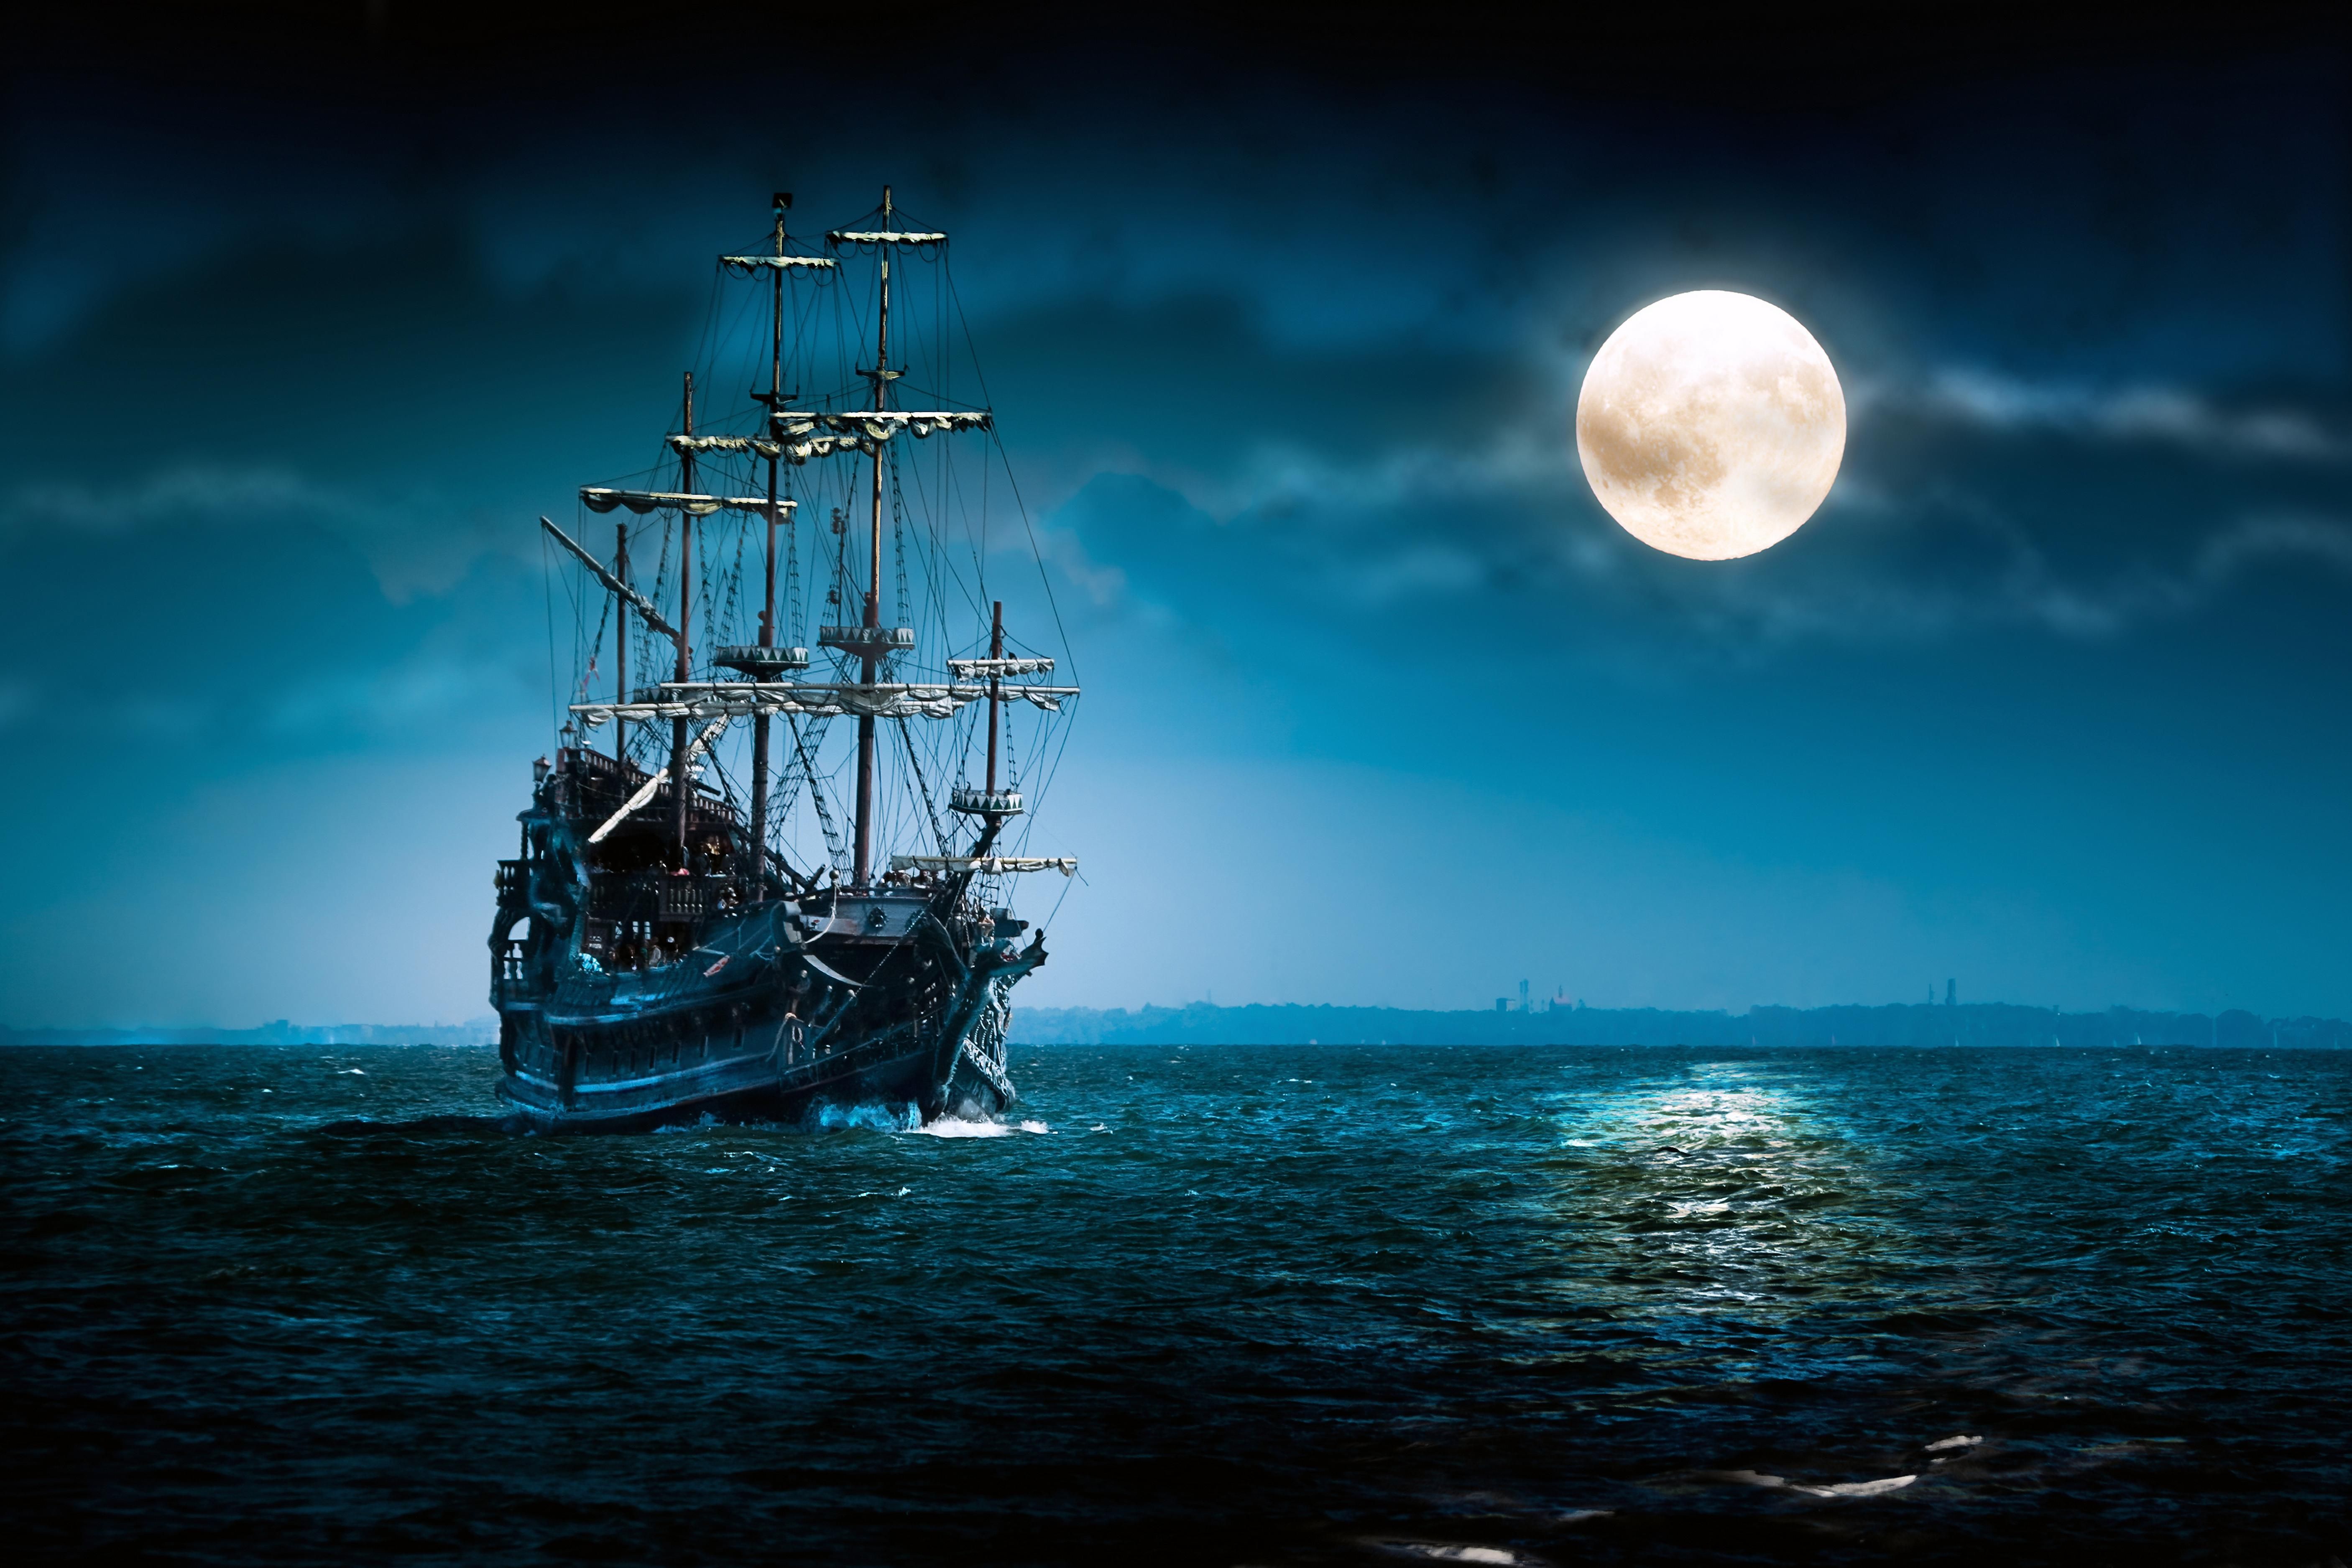 Download Pirate Ship Wallpaper Widescreen #y0rrl hdxwallpaperz.com